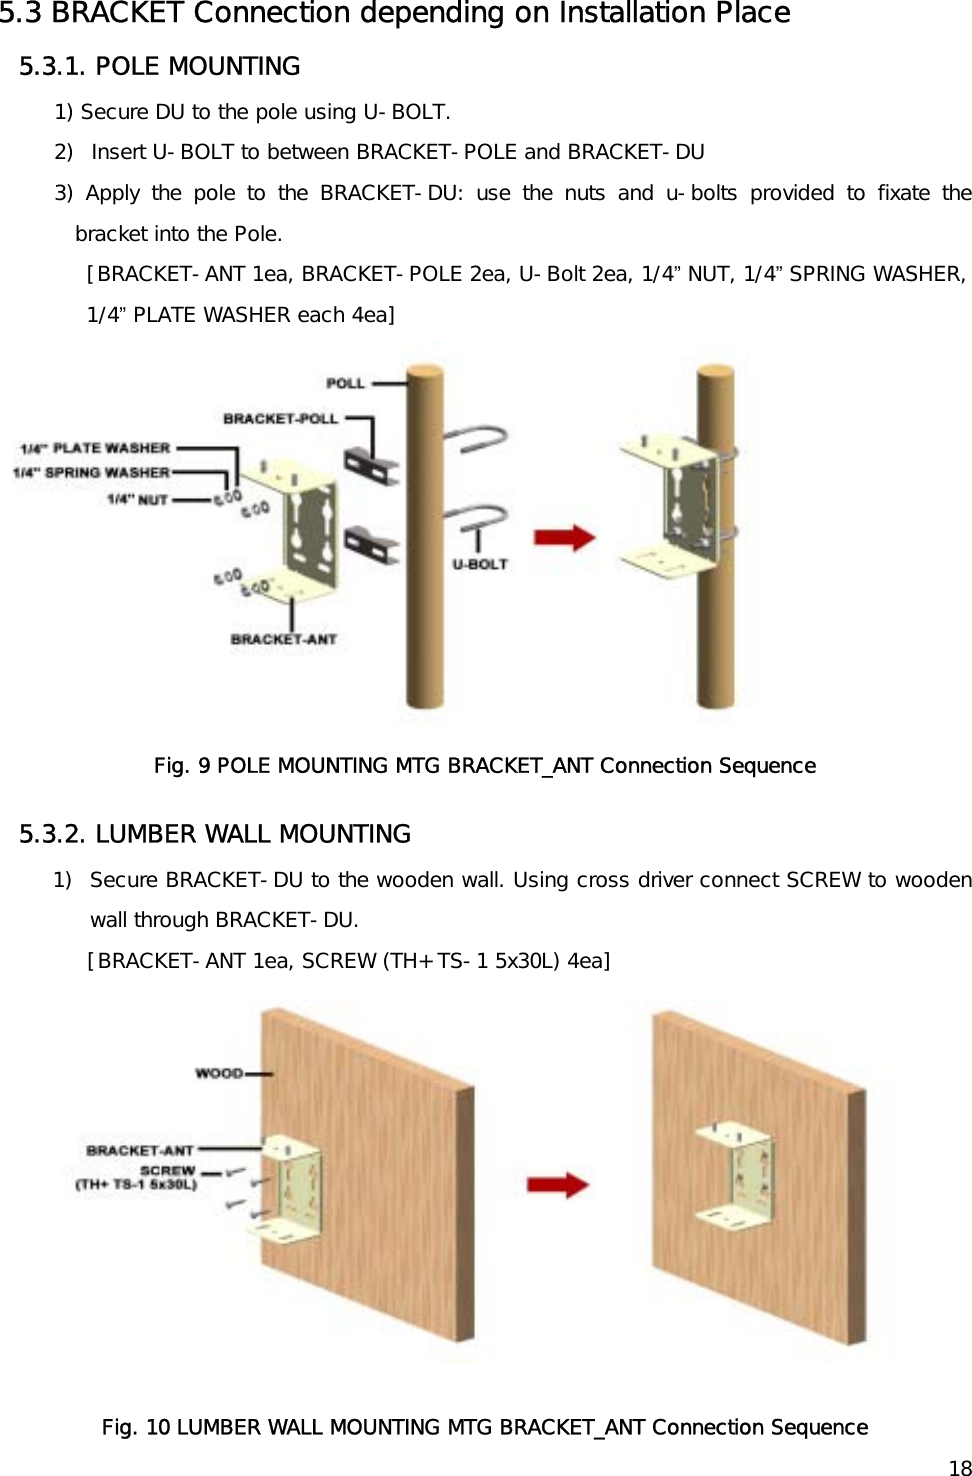   185.3 BRACKET Connection depending on Installation Place 5.3.1. POLE MOUNTING 1) Secure DU to the pole using U-BOLT.  2)  Insert U-BOLT to between BRACKET-POLE and BRACKET-DU 3) Apply the pole to the BRACKET-DU: use the nuts and u-bolts provided to fixate the bracket into the Pole. [BRACKET-ANT 1ea, BRACKET-POLE 2ea, U-Bolt 2ea, 1/4” NUT, 1/4” SPRING WASHER, 1/4” PLATE WASHER each 4ea]  Fig. 9 POLE MOUNTING MTG BRACKET_ANT Connection Sequence 5.3.2. LUMBER WALL MOUNTING 1)  Secure BRACKET-DU to the wooden wall. Using cross driver connect SCREW to wooden wall through BRACKET-DU.      [BRACKET-ANT 1ea, SCREW (TH+ TS-1 5x30L) 4ea]   Fig. 10 LUMBER WALL MOUNTING MTG BRACKET_ANT Connection Sequence 